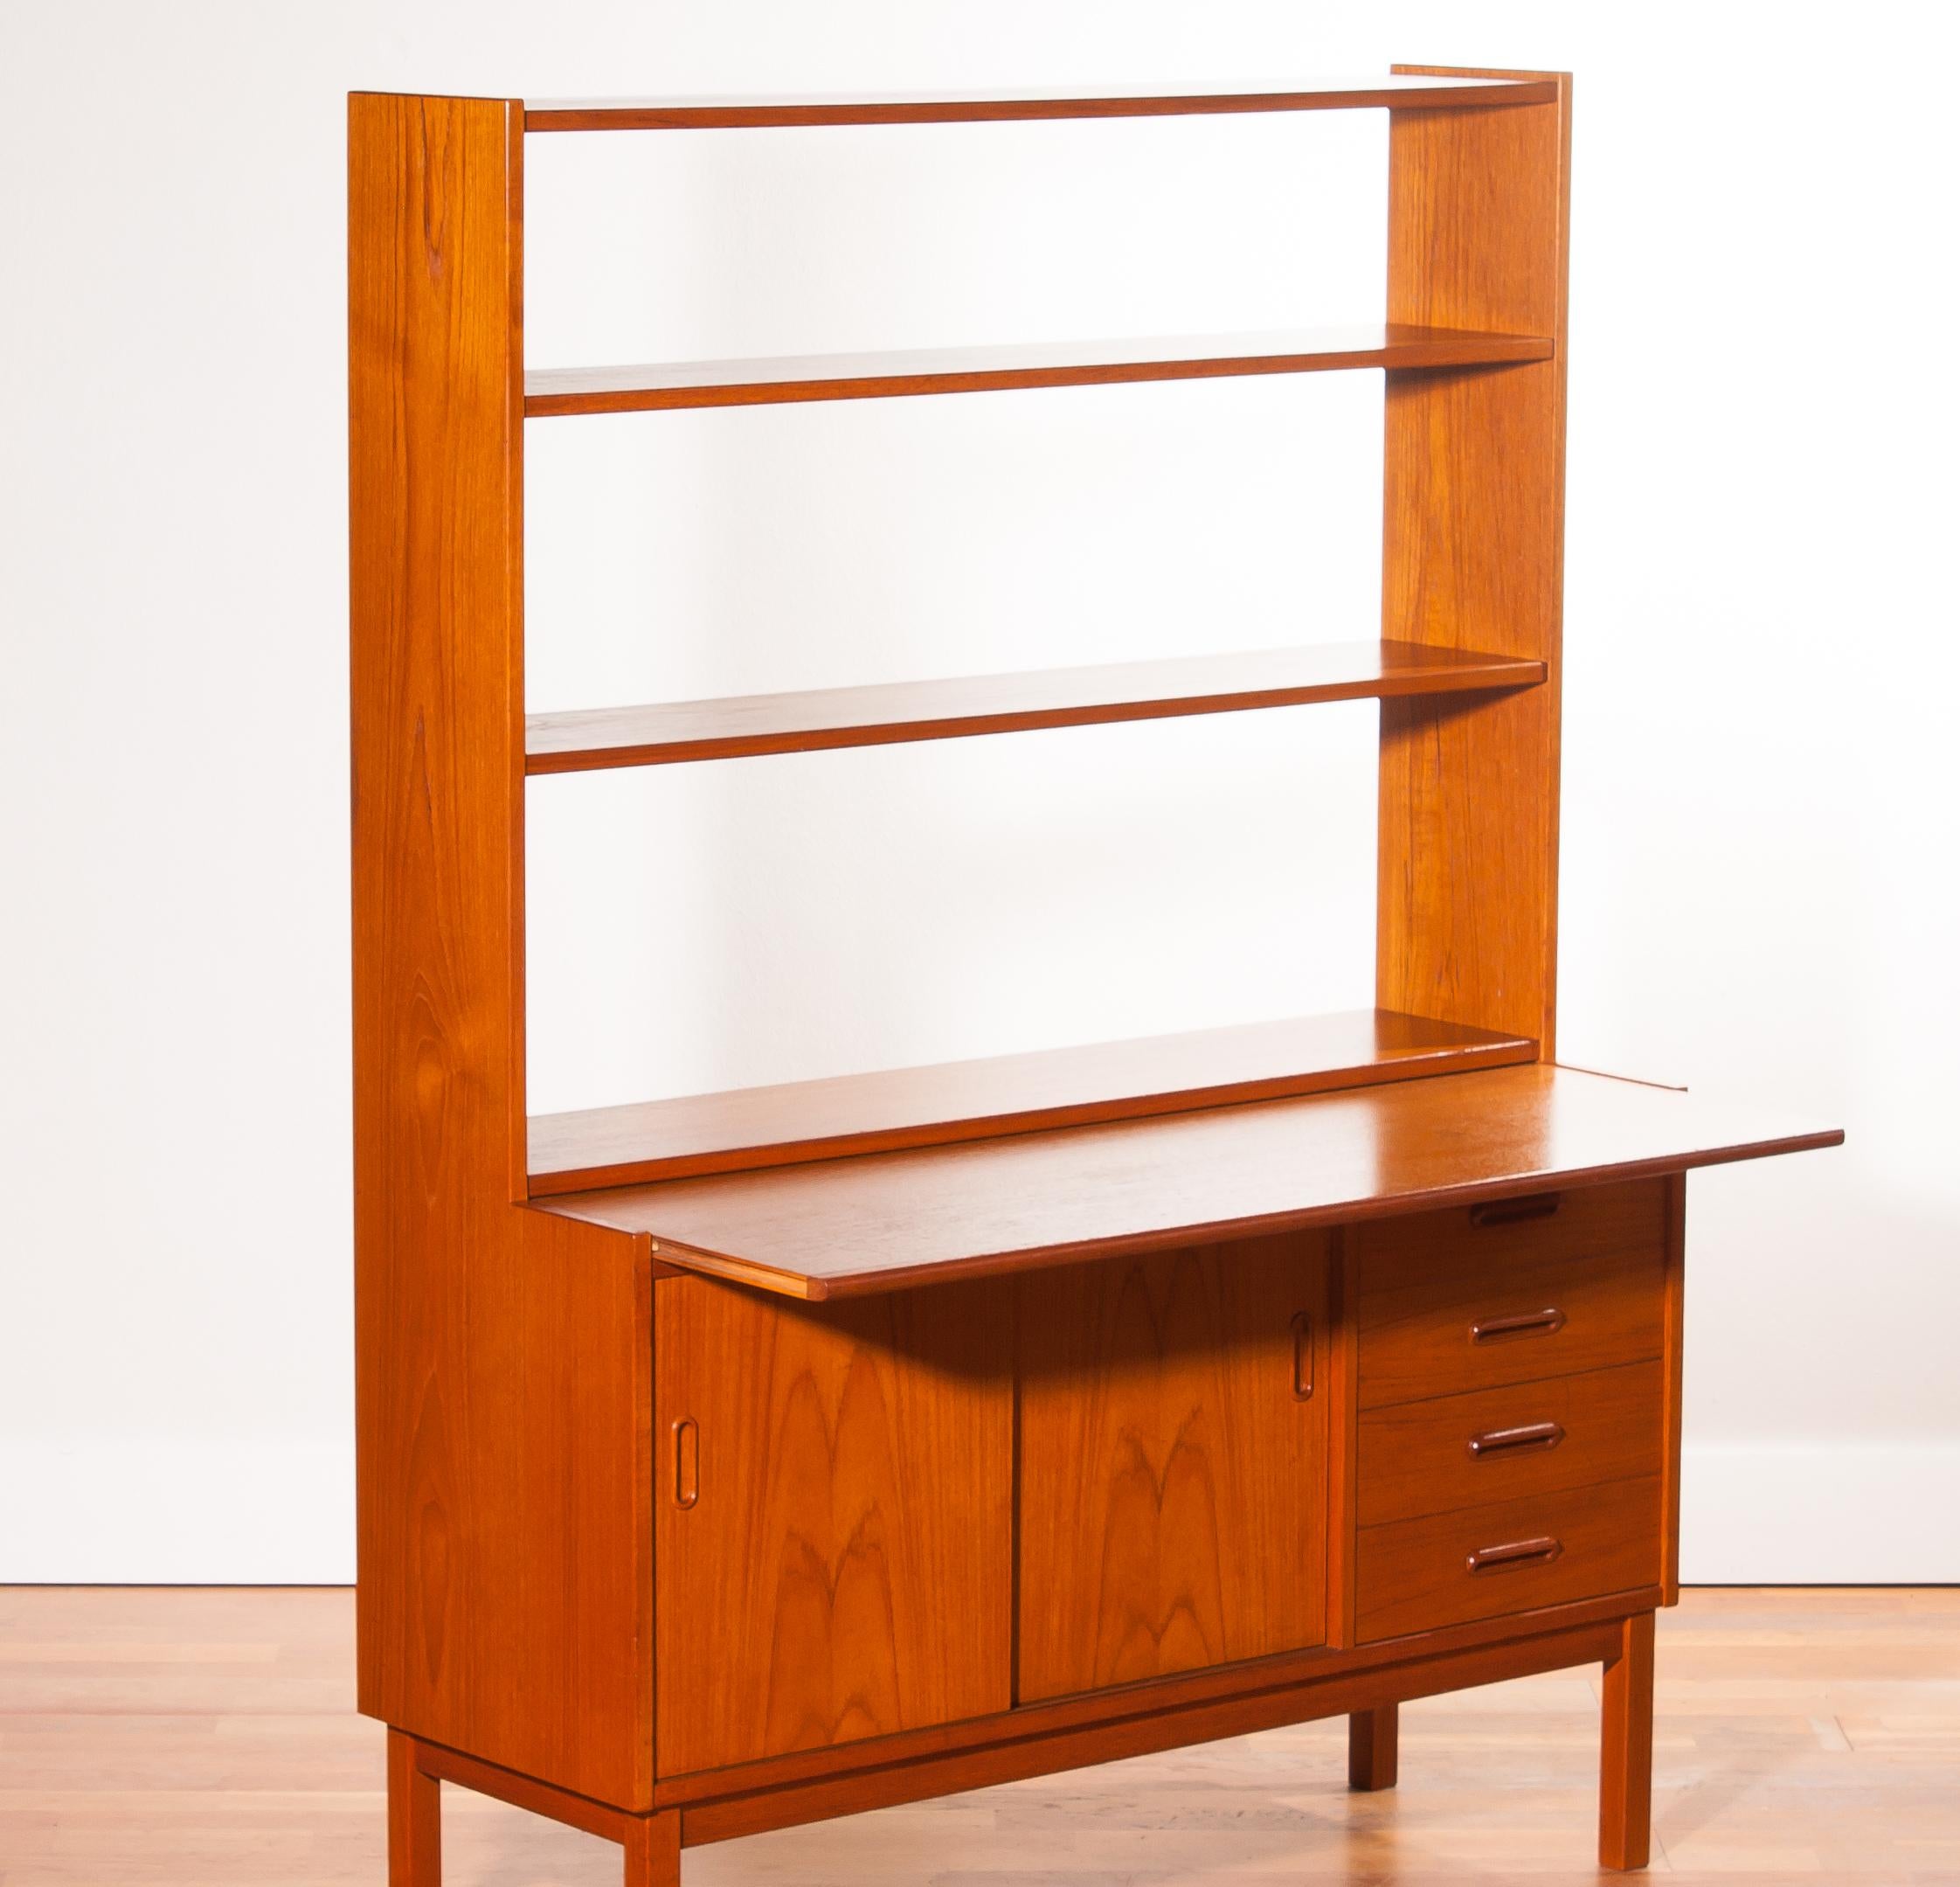 1960s, Teak Book Case with Slidable Writing or Working Space from Sweden 4